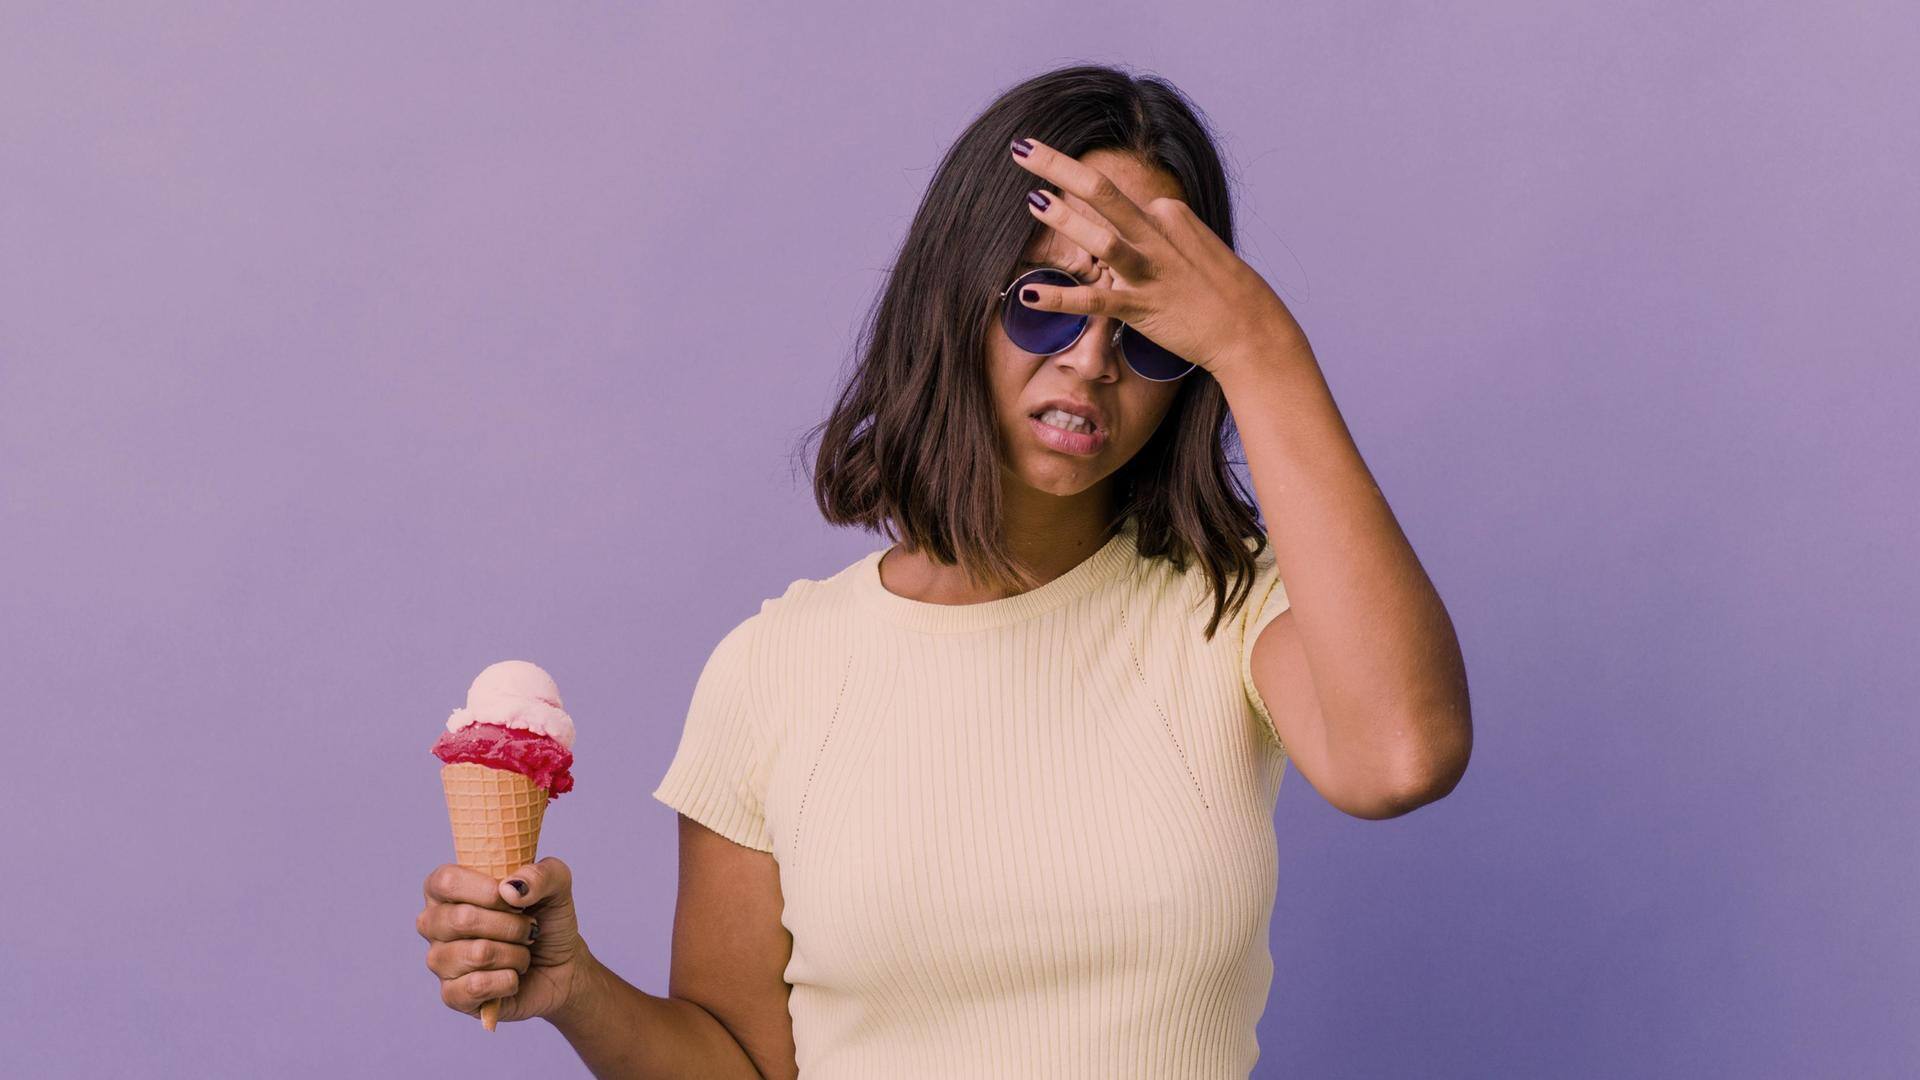 The cold truth about ice cream headaches